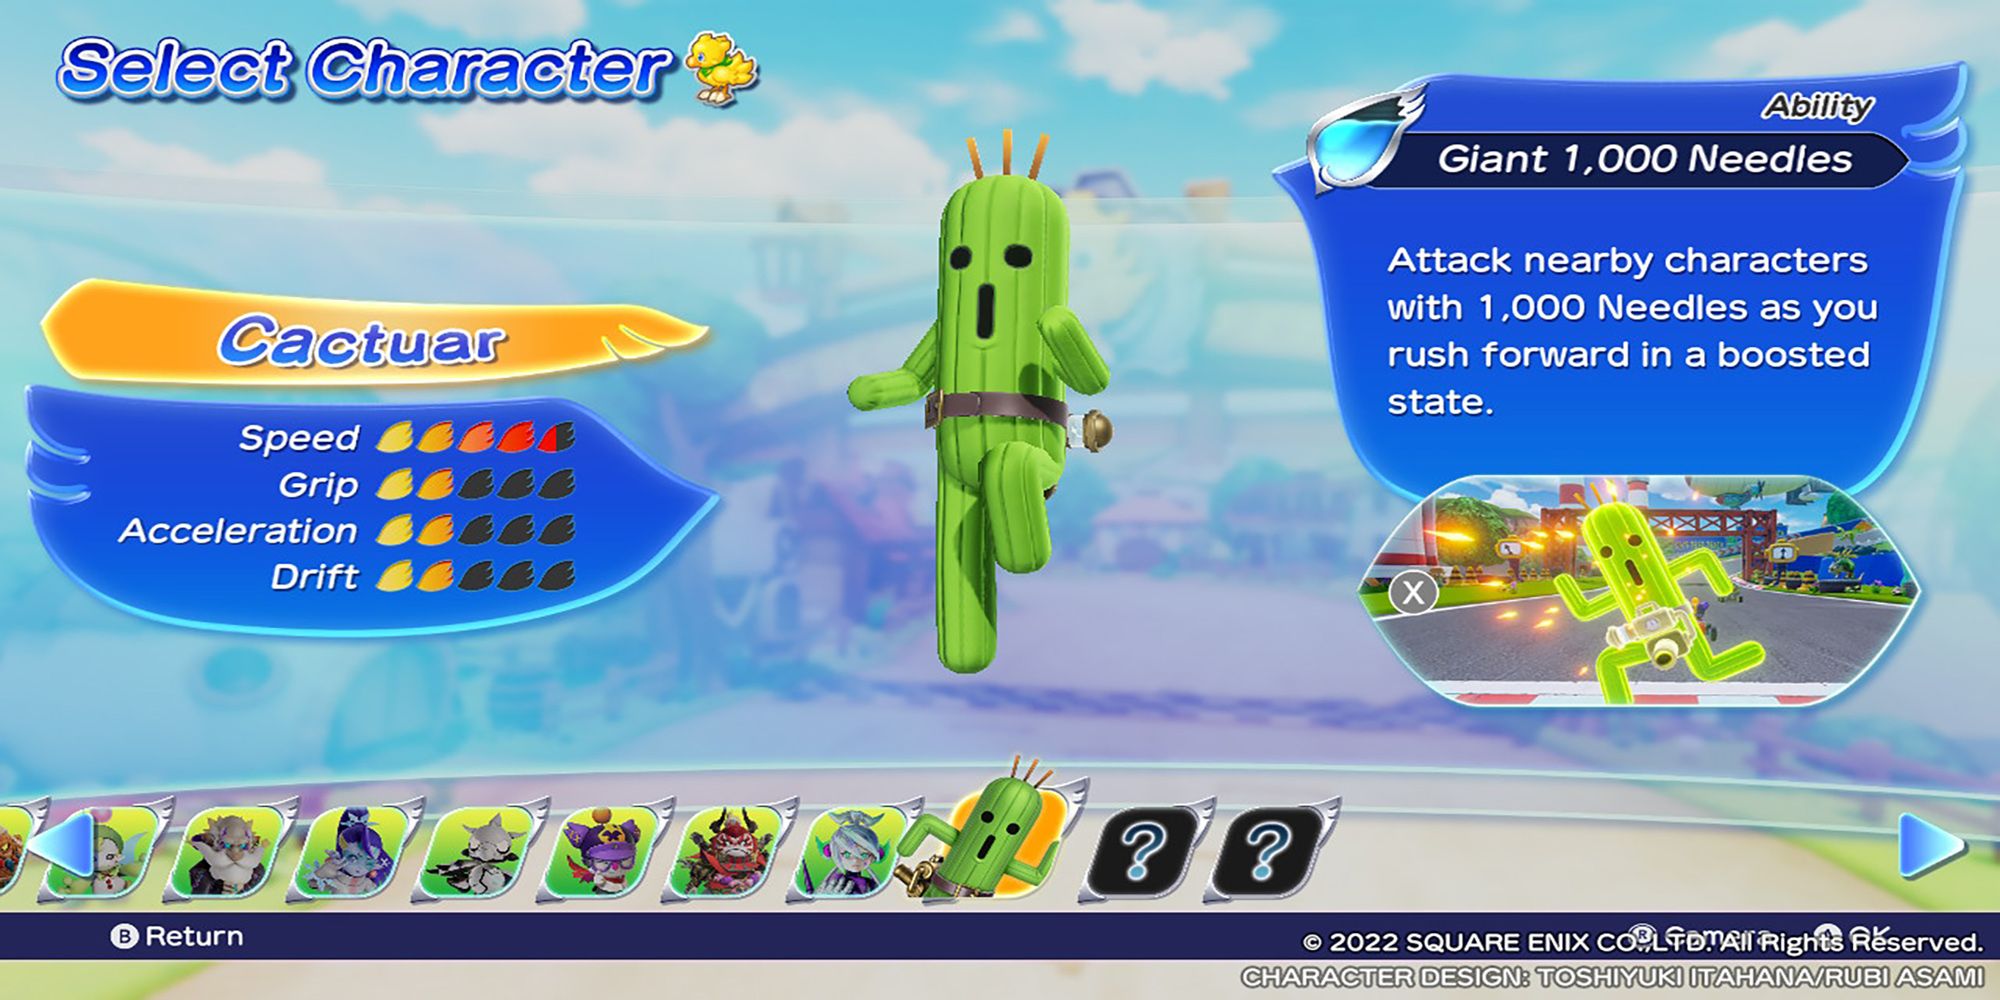 Cactuar's character model, along with their stats and abilities, in the Select Character menu. Chocobo GP.